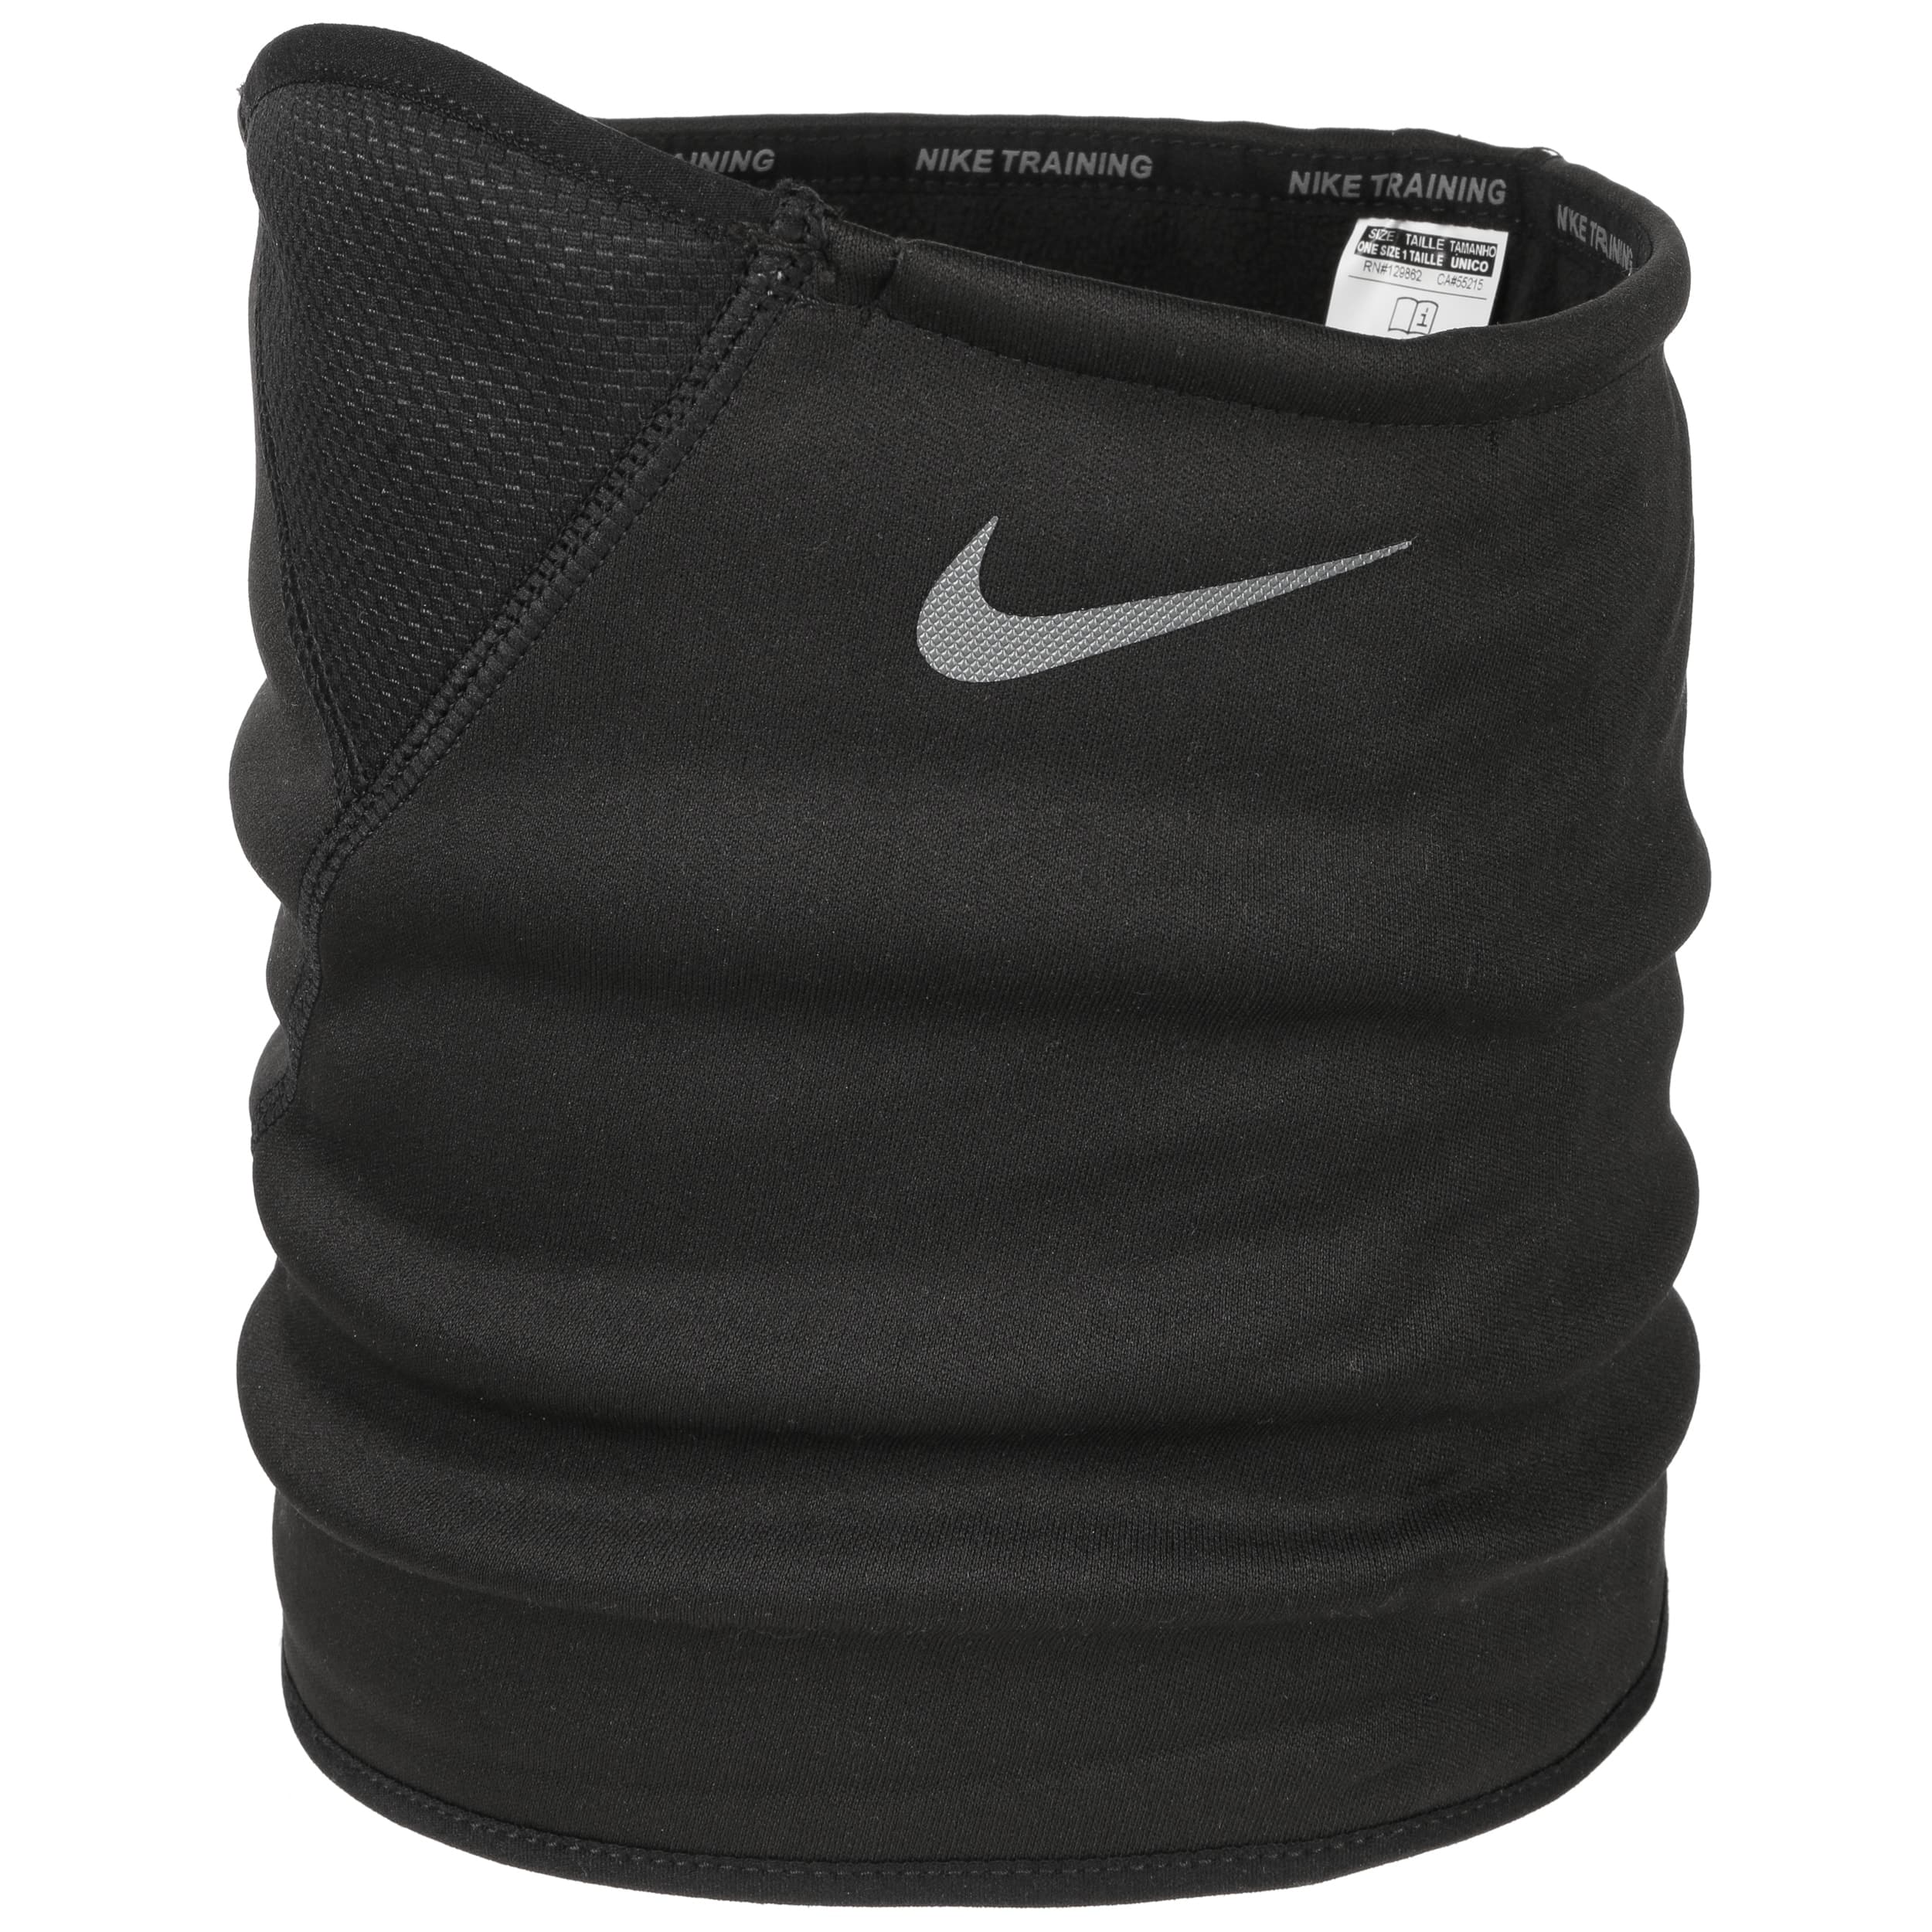 Therma Sphere Adjustable Neck Warmer by Nike - 32,95